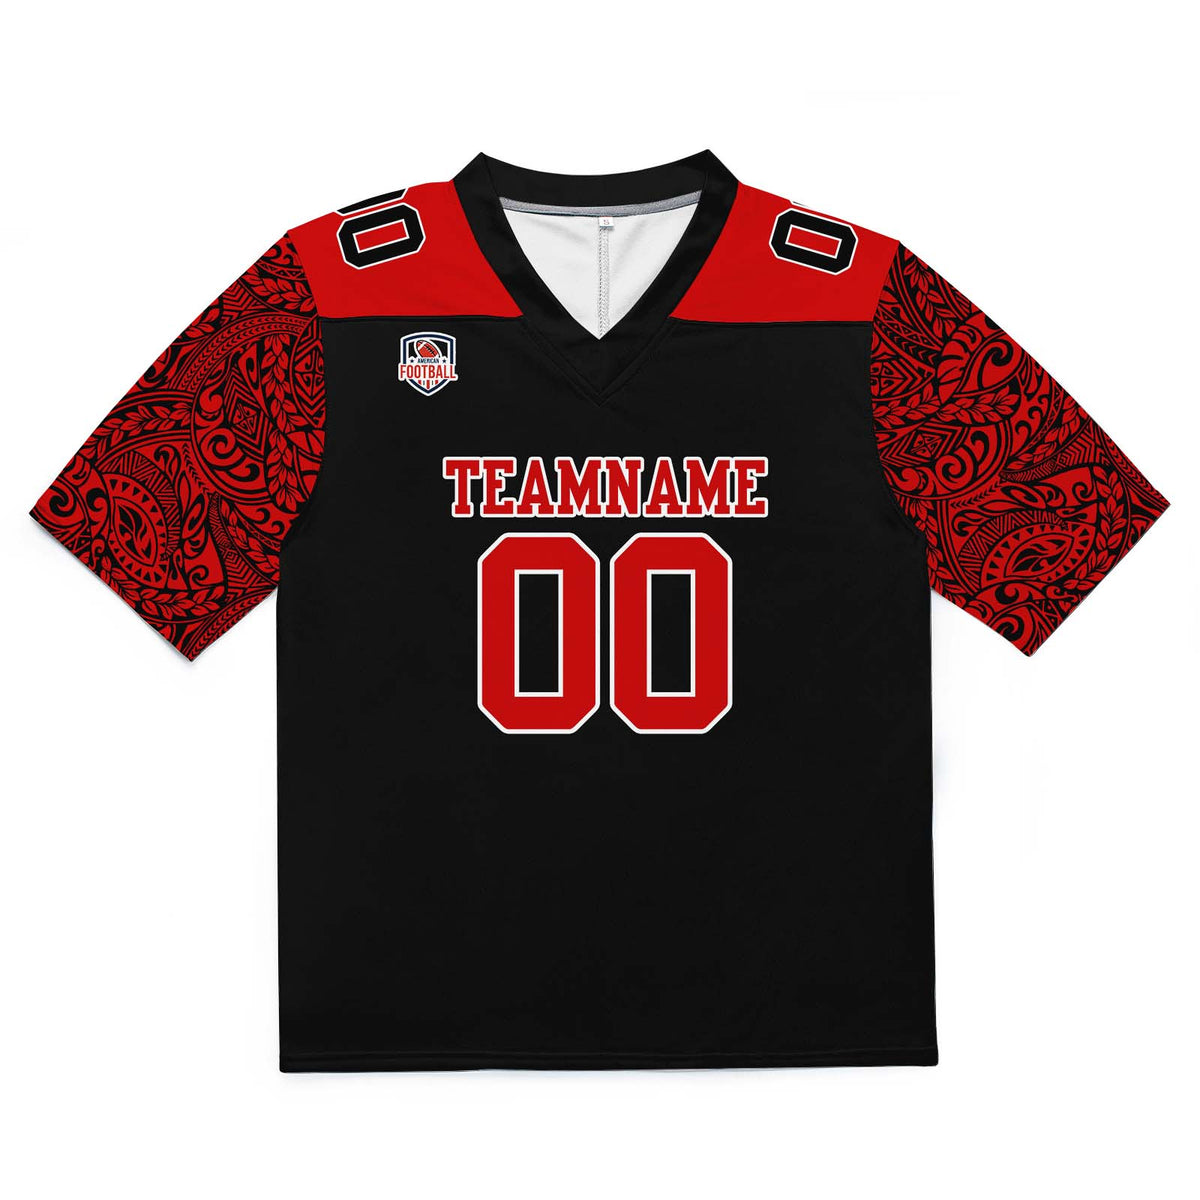 Custom Football Jersey Shirt Personalized Stitched Printed Team Name Number Black&Red